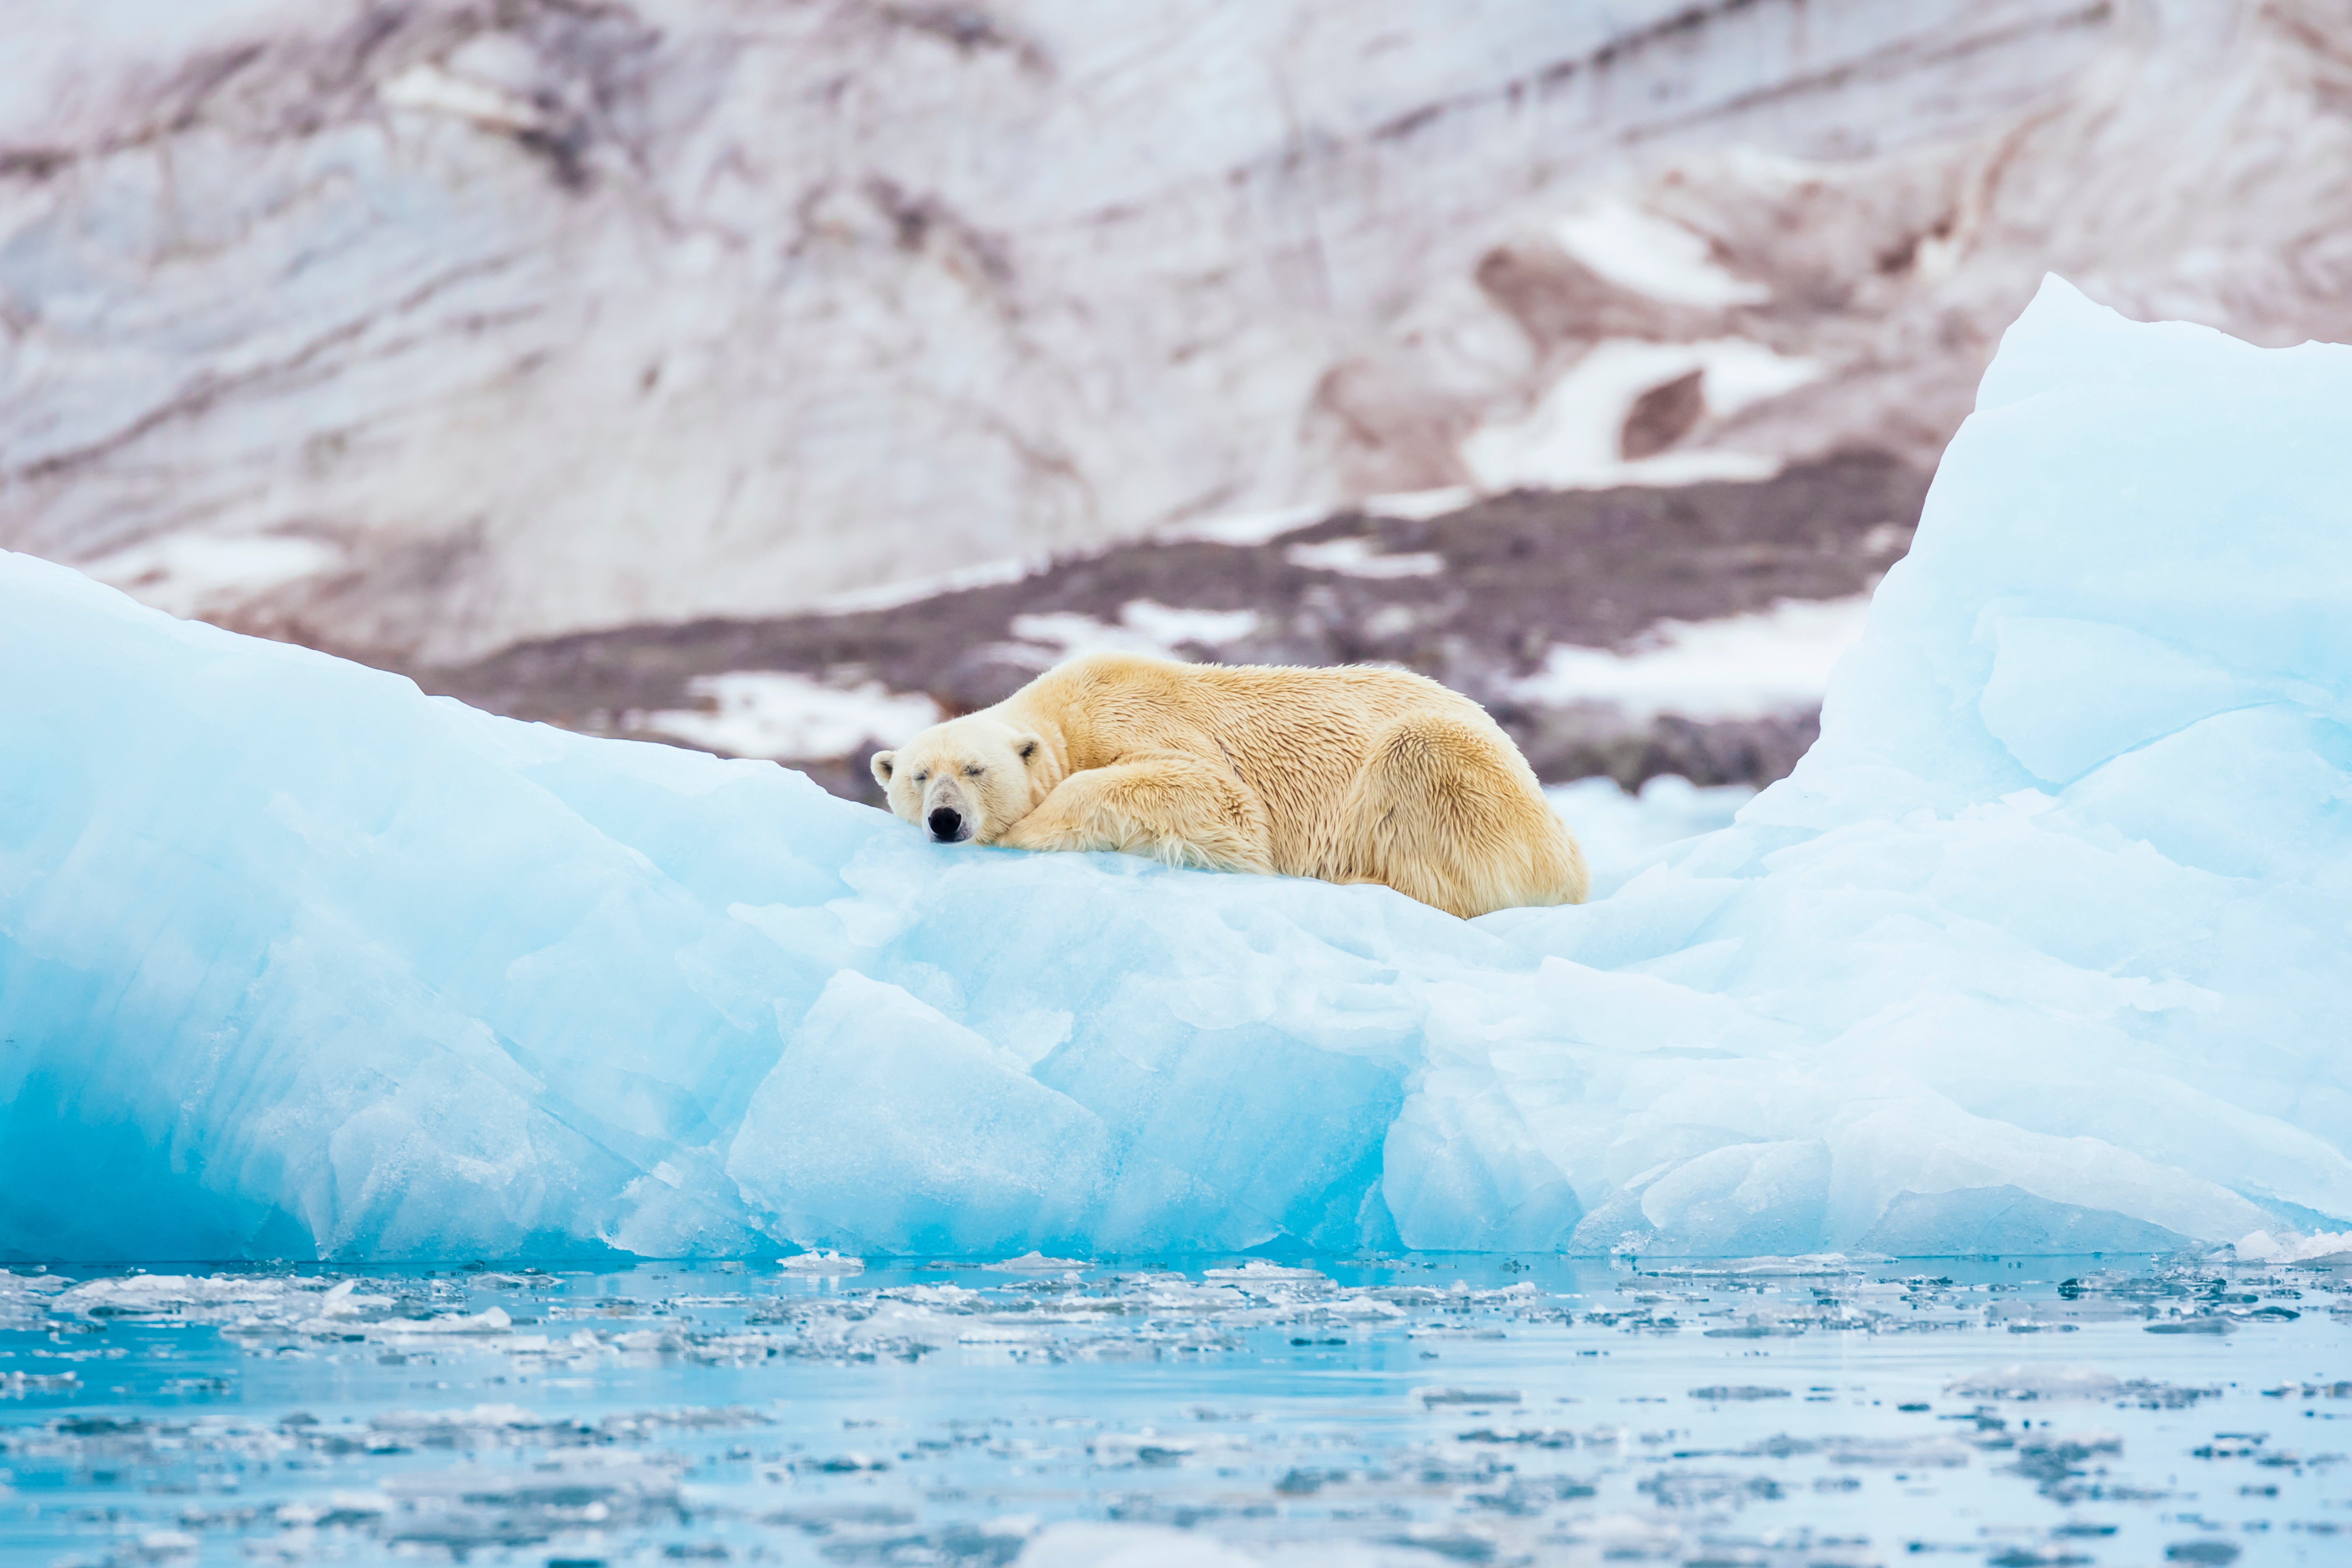 A polar bear on Svalbard, off the coasts of Norway and Russia, and where melting sea ice has forced the predator to rapidly adapt.